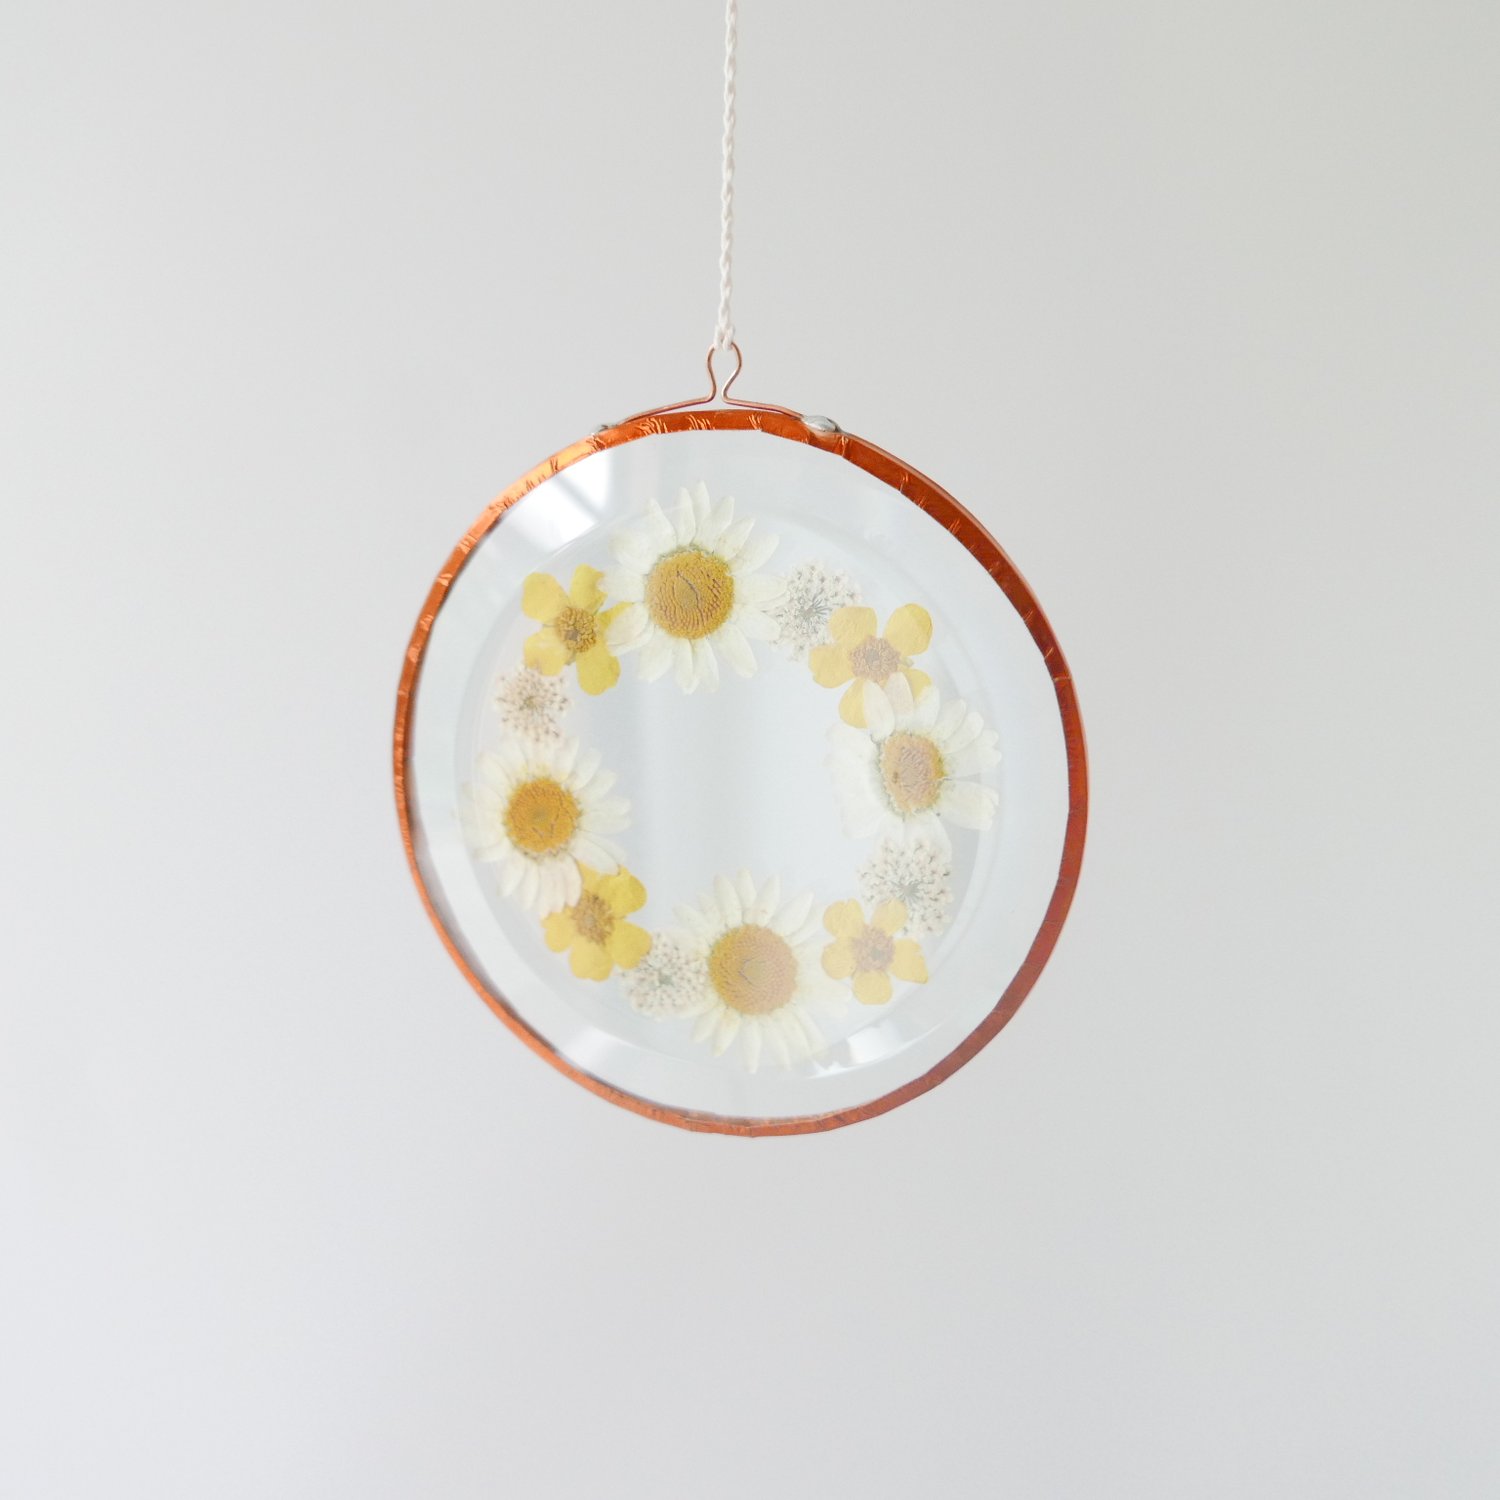 Image of Pressed Flower Suncatcher - Buttercup and Daisy